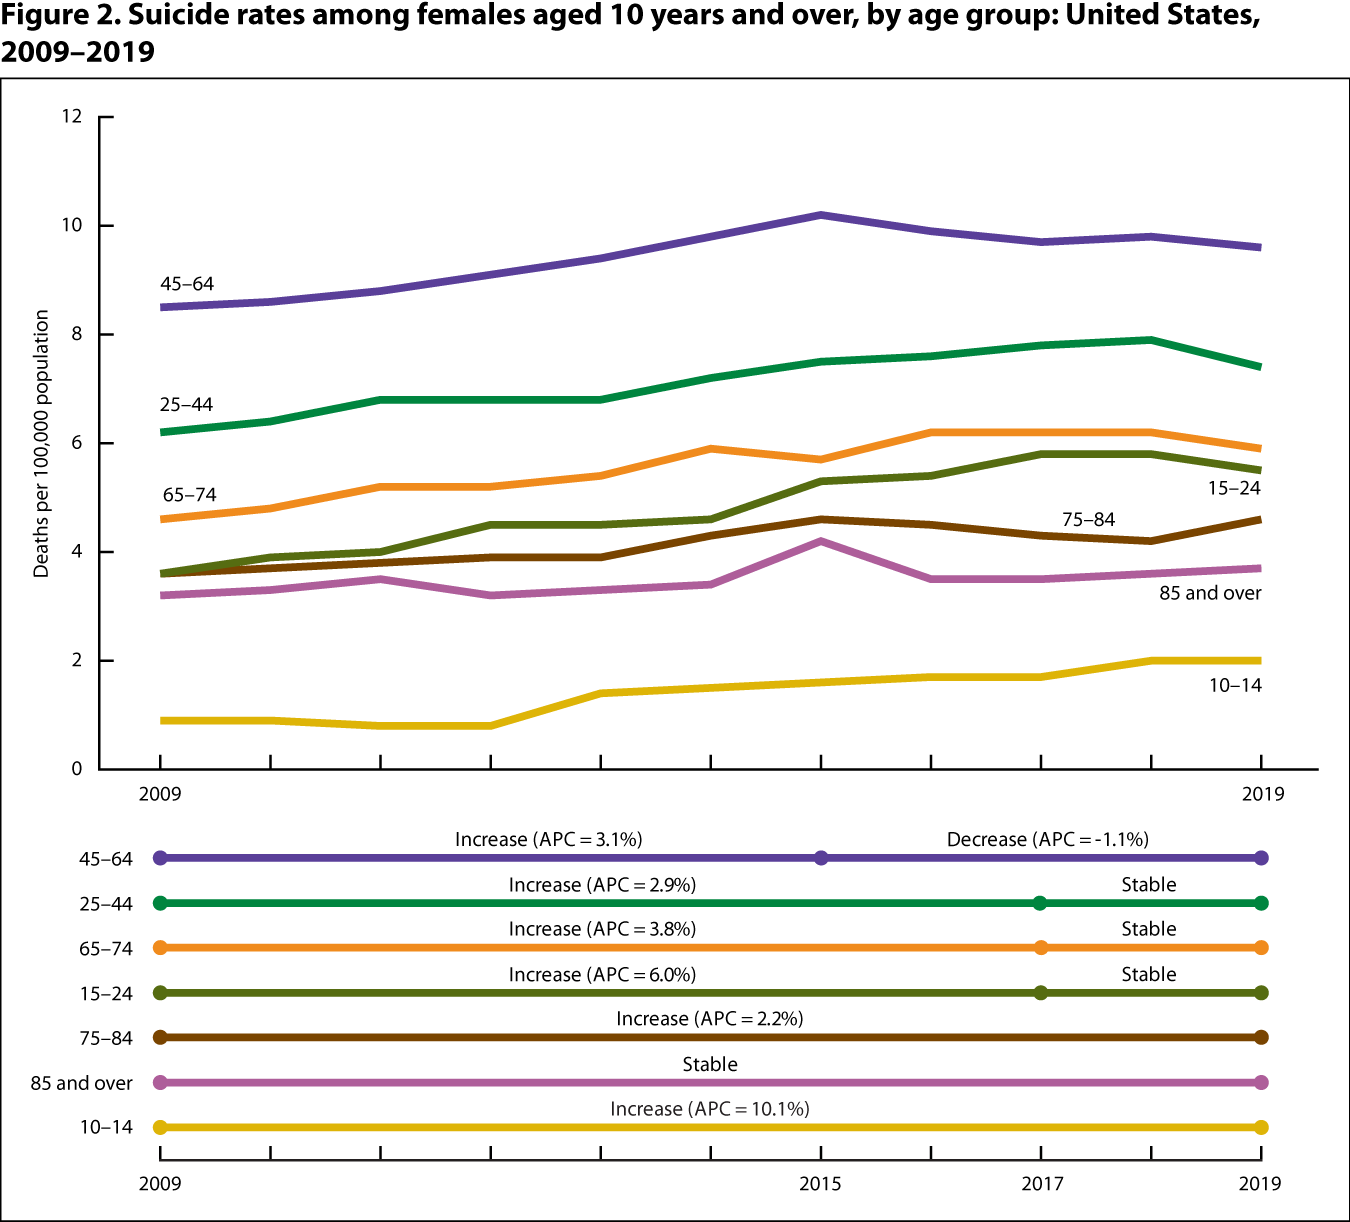 Figure 2 is a line graph showing suicide rates (deaths per 100,000 population) among females aged 10 years and over by age group for 2009 through 2019.